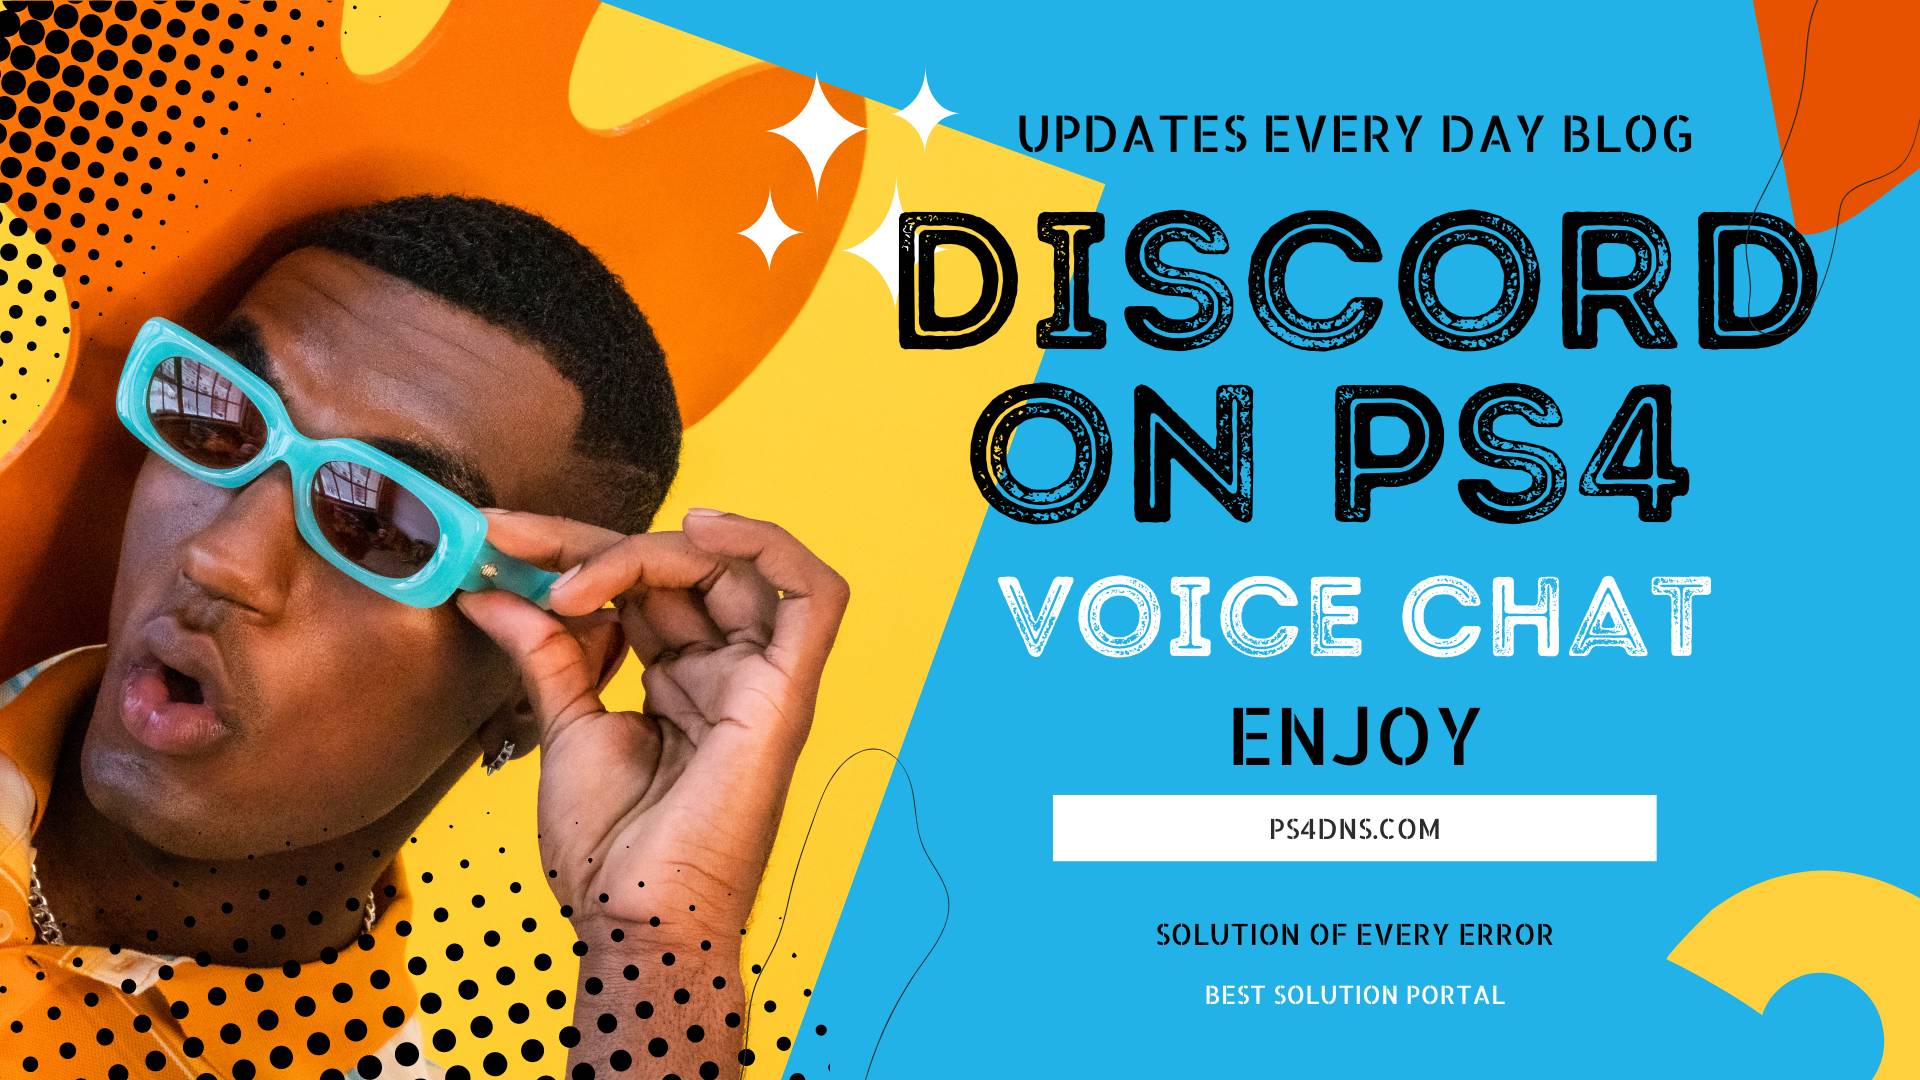 How to use discord on ps4 voice chat